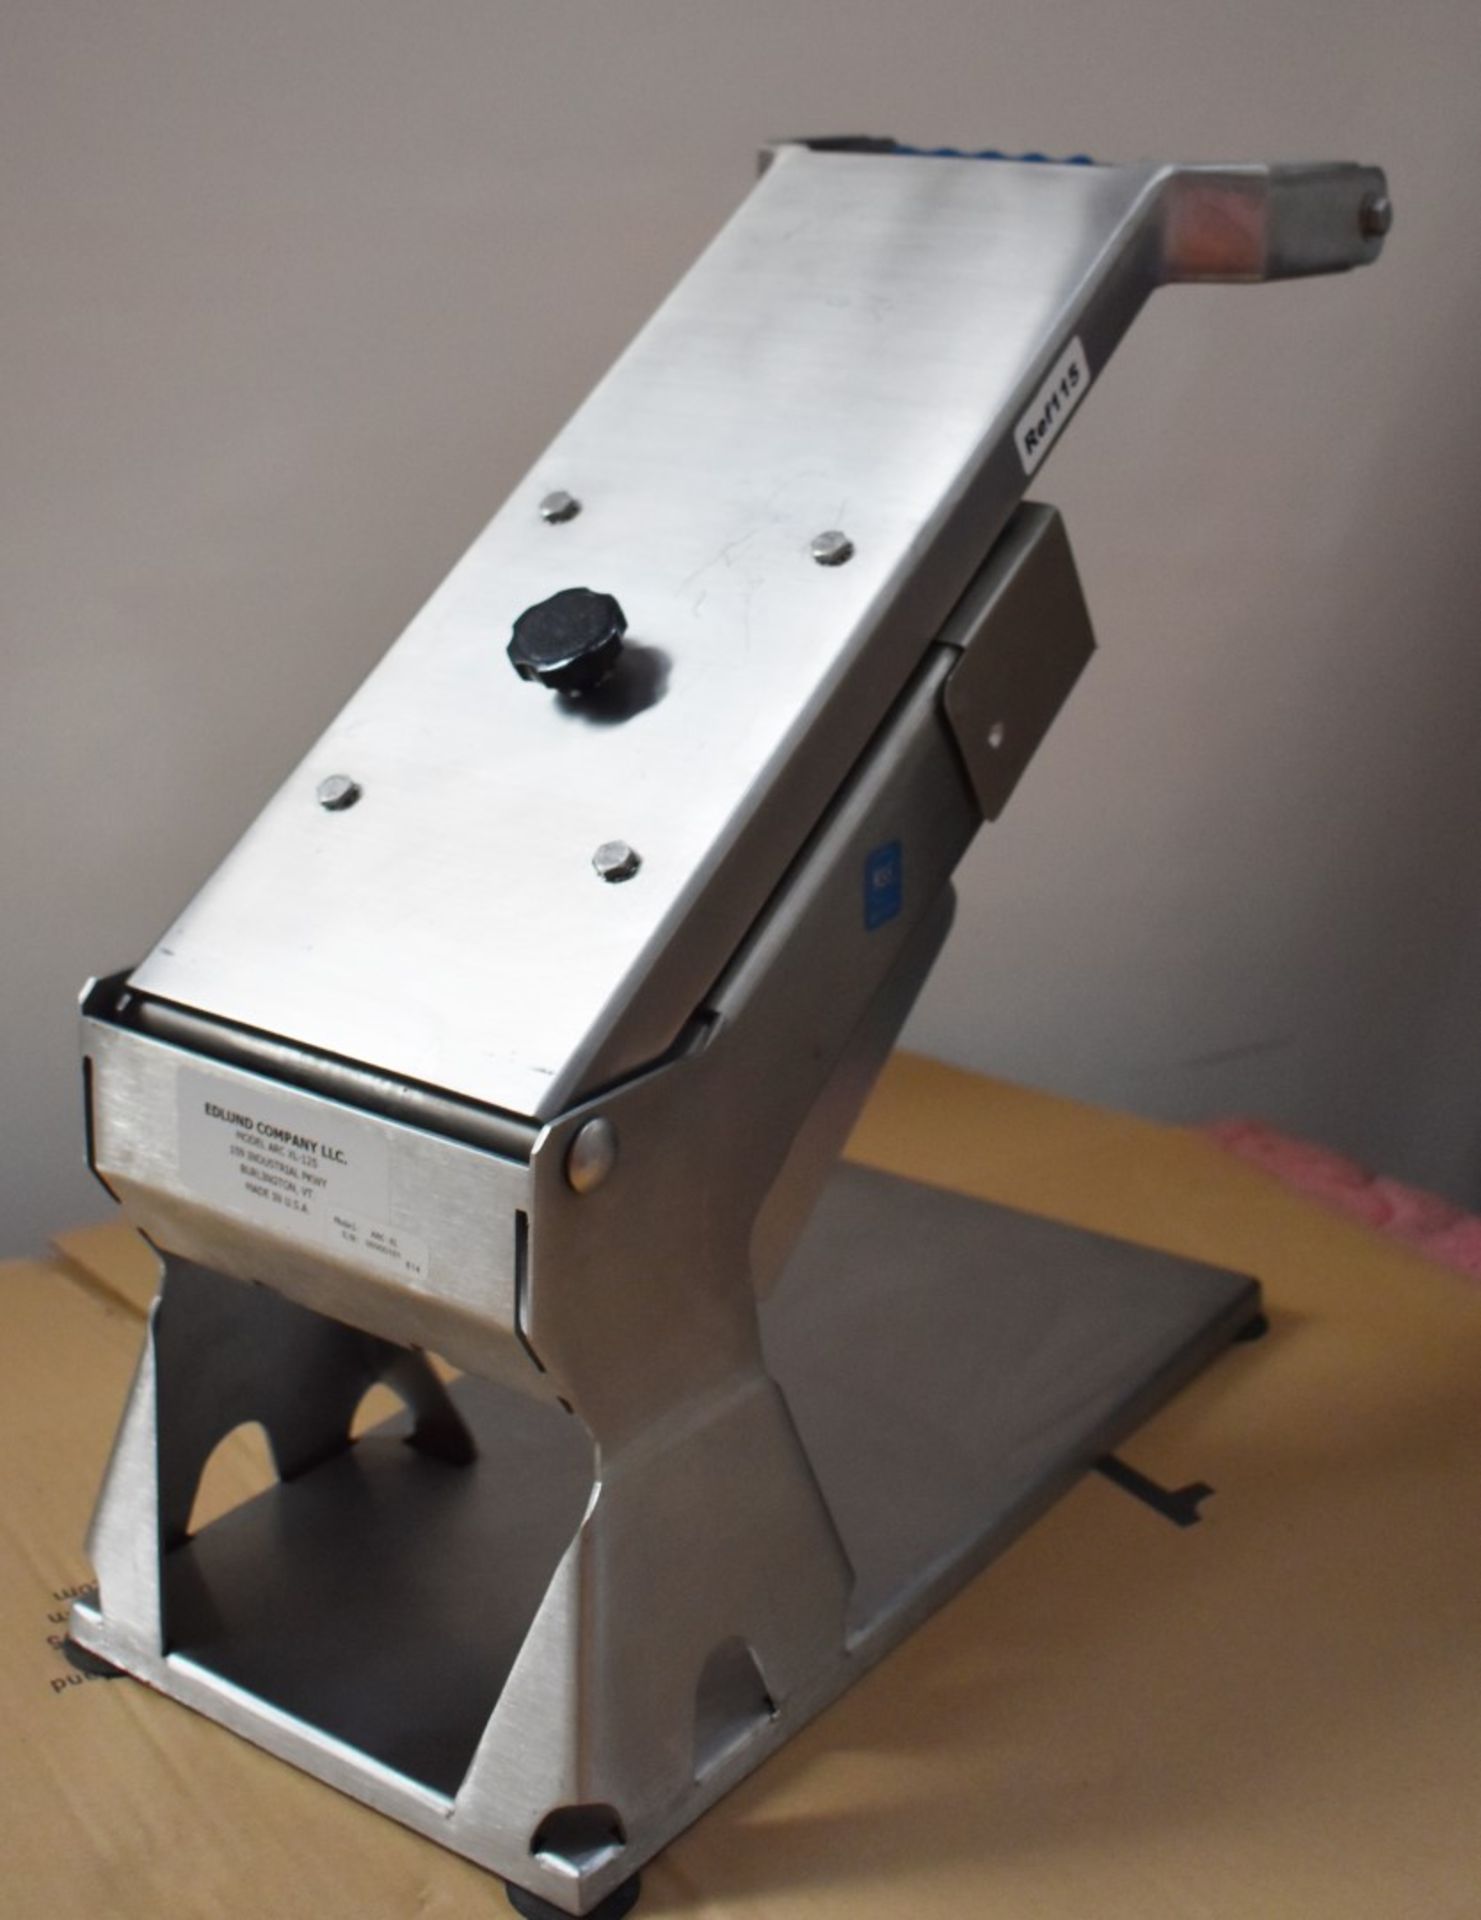 1 x Edlund XL-125 ARC Manual Fruit and Vegetable Slicer With Blades - CL232 - Ref115 - Location: - Image 10 of 11